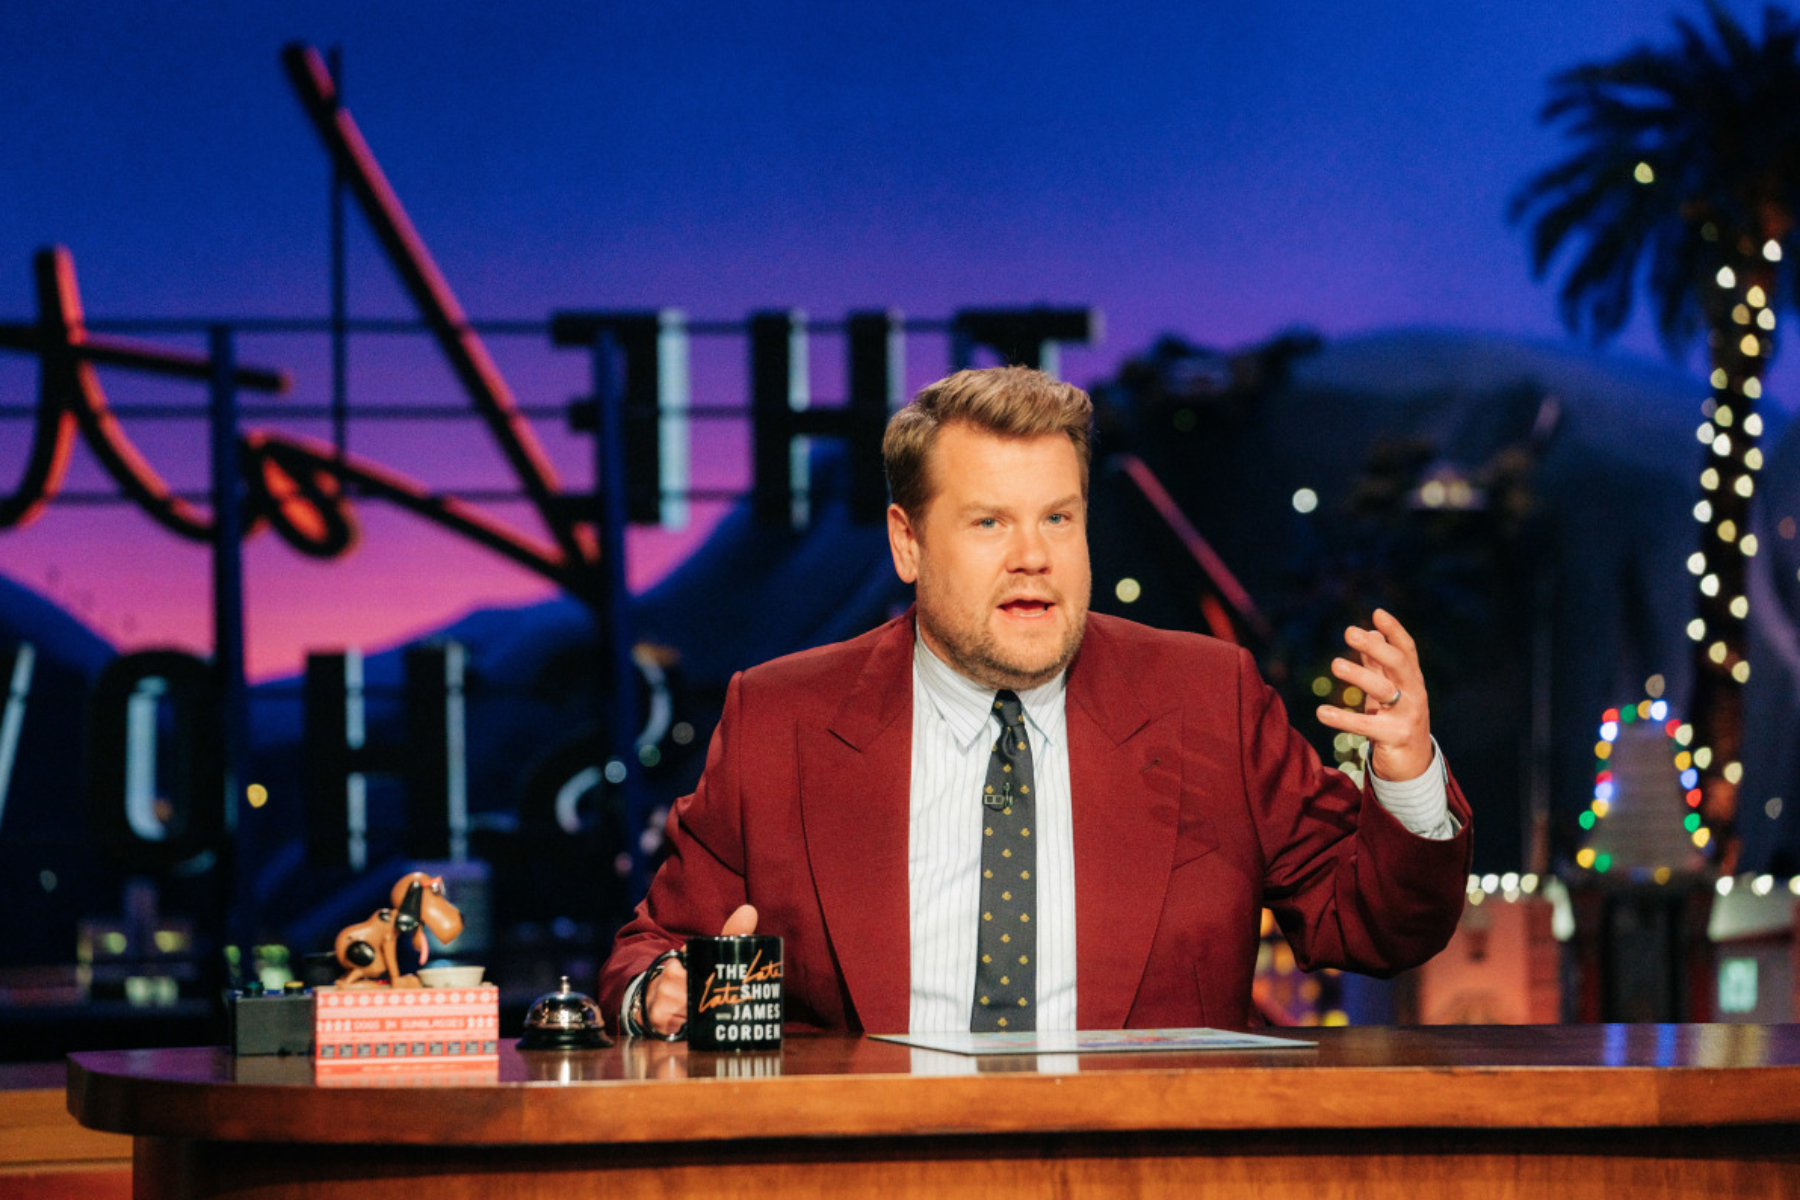 The Late Late Show with James Corden airing Tuesday, December 14, 2021, with guests Tessa Thompson, Dwyane Wade, and standup comic Andrew Michaan. Photo: Terence Patrick ©2021 CBS Broadcasting, Inc. All Rights Reserved